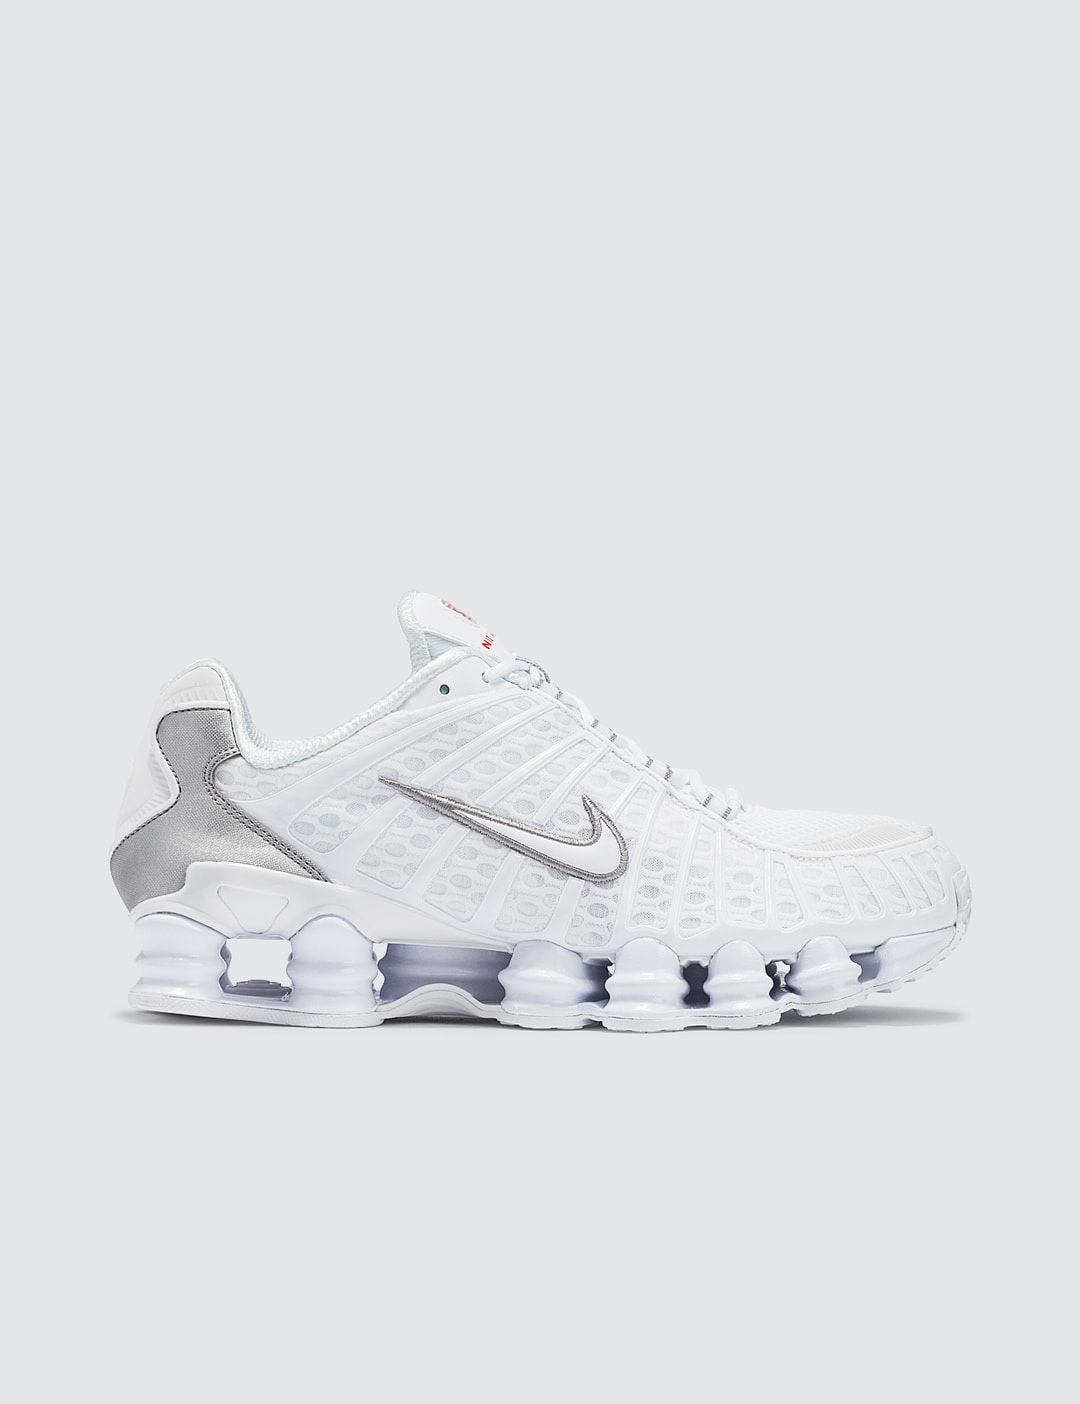 Nike - Nike Shox | - Globally Curated Fashion and Lifestyle by Hypebeast